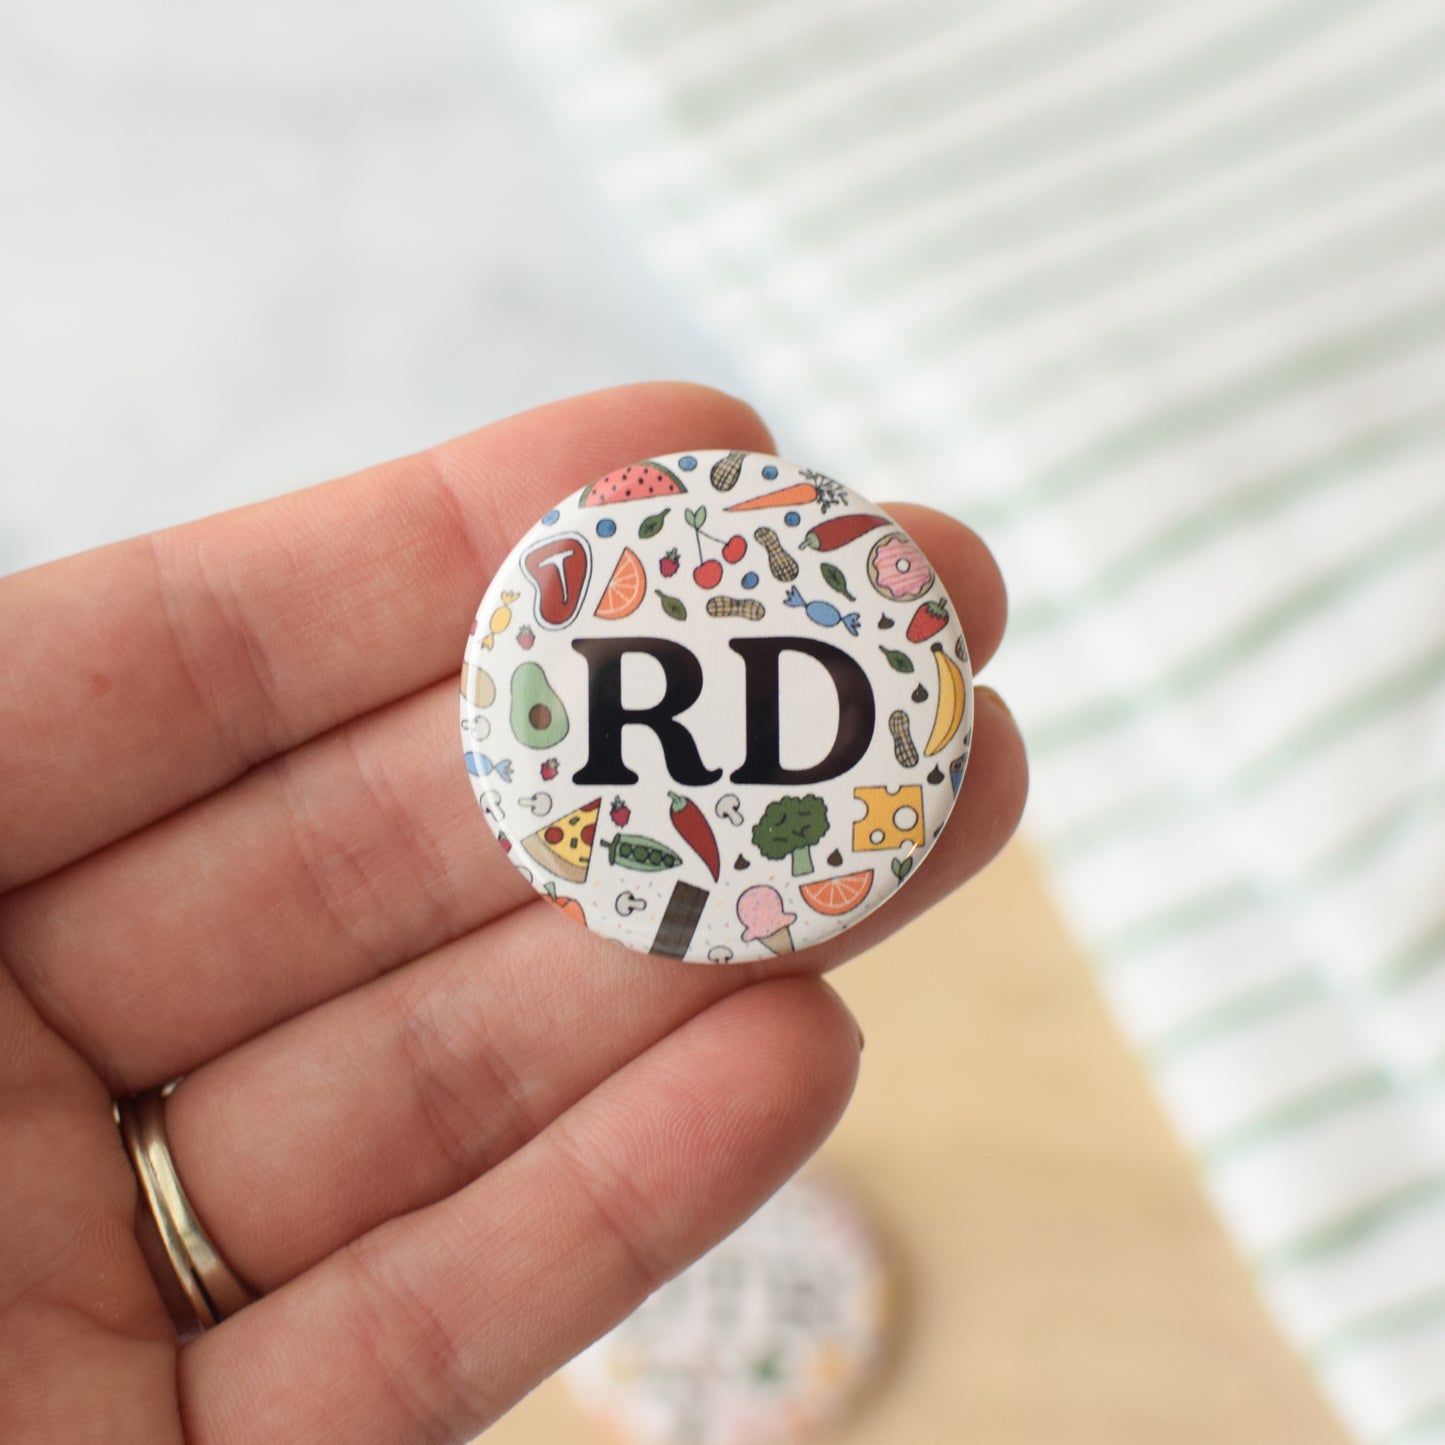 Pizza Badge Reel, Pizza Gifts, Pizza Gift, Food Badge Reel, Food Badge Holder, Driver Gifts, Pizza ID Holder